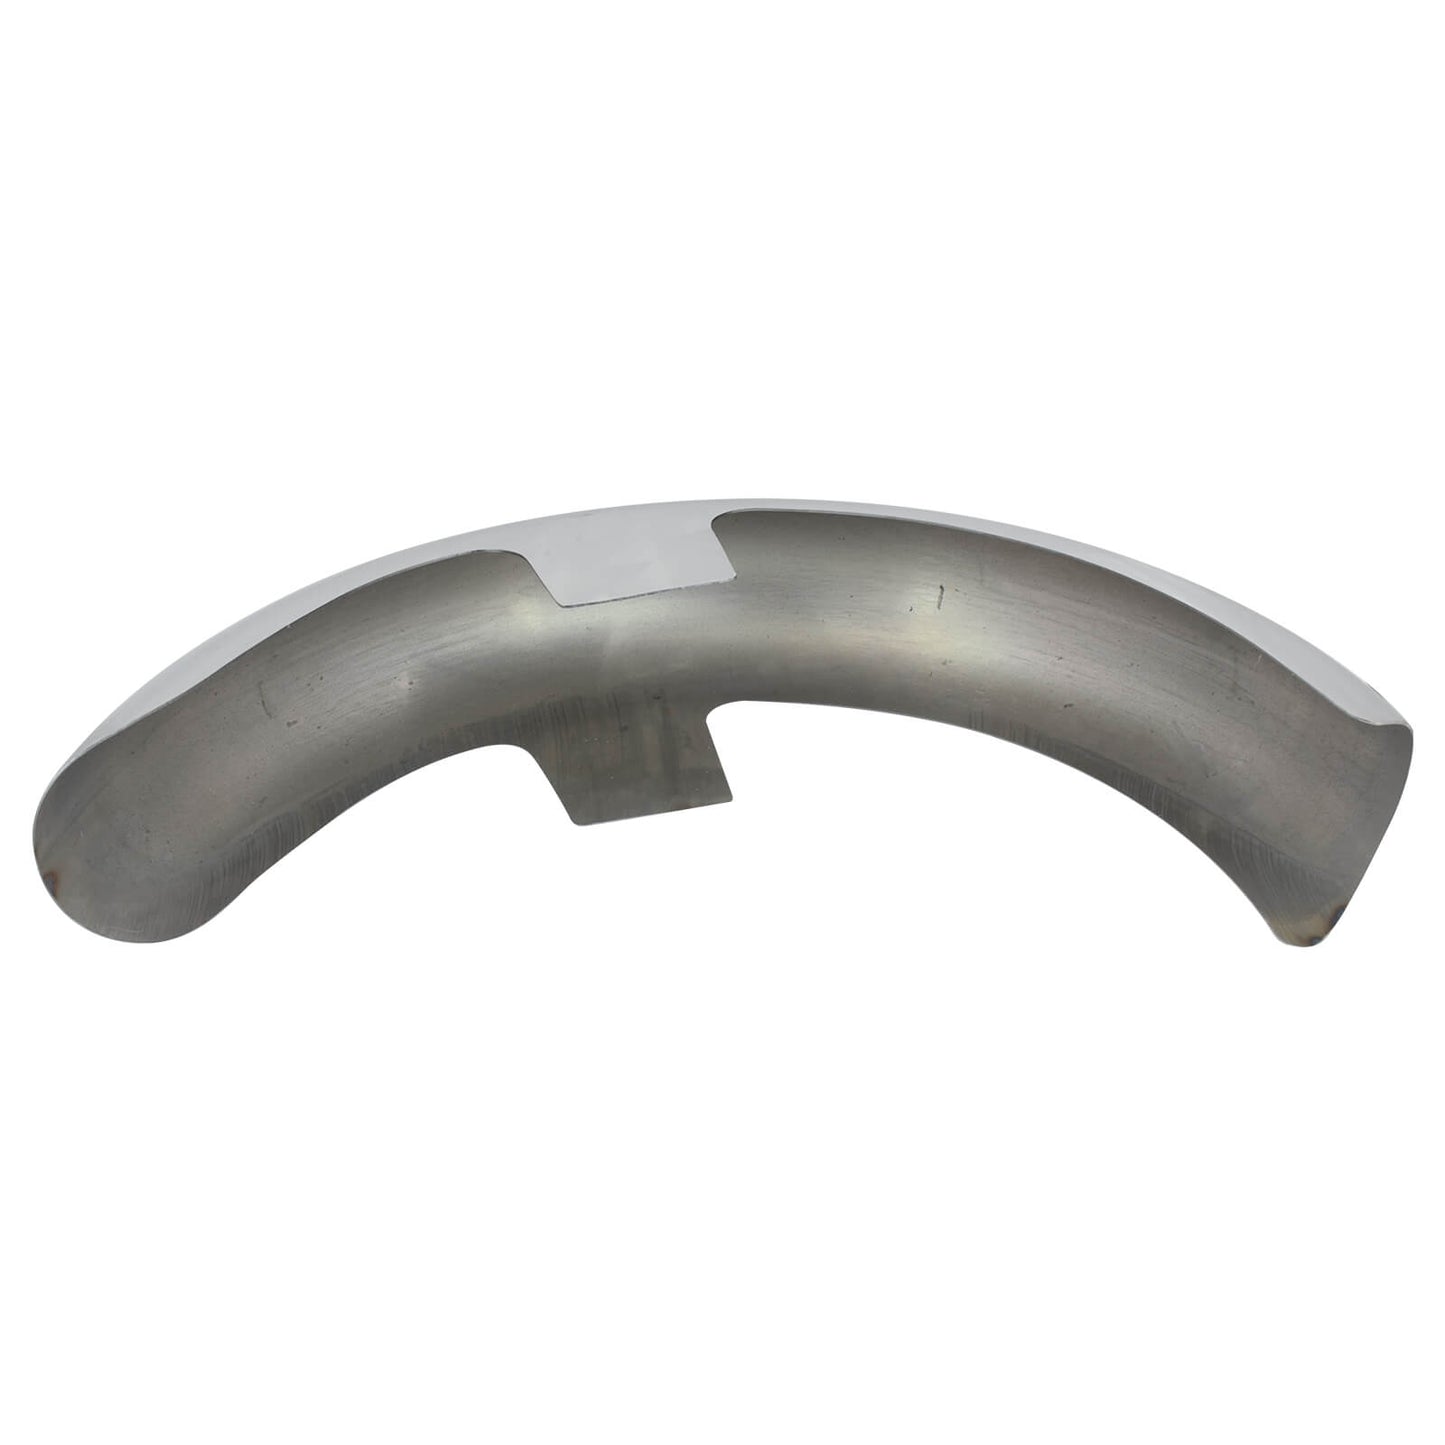 Mactions-21-inch-harley-davidson-motorcycle-front-fender-CR026409